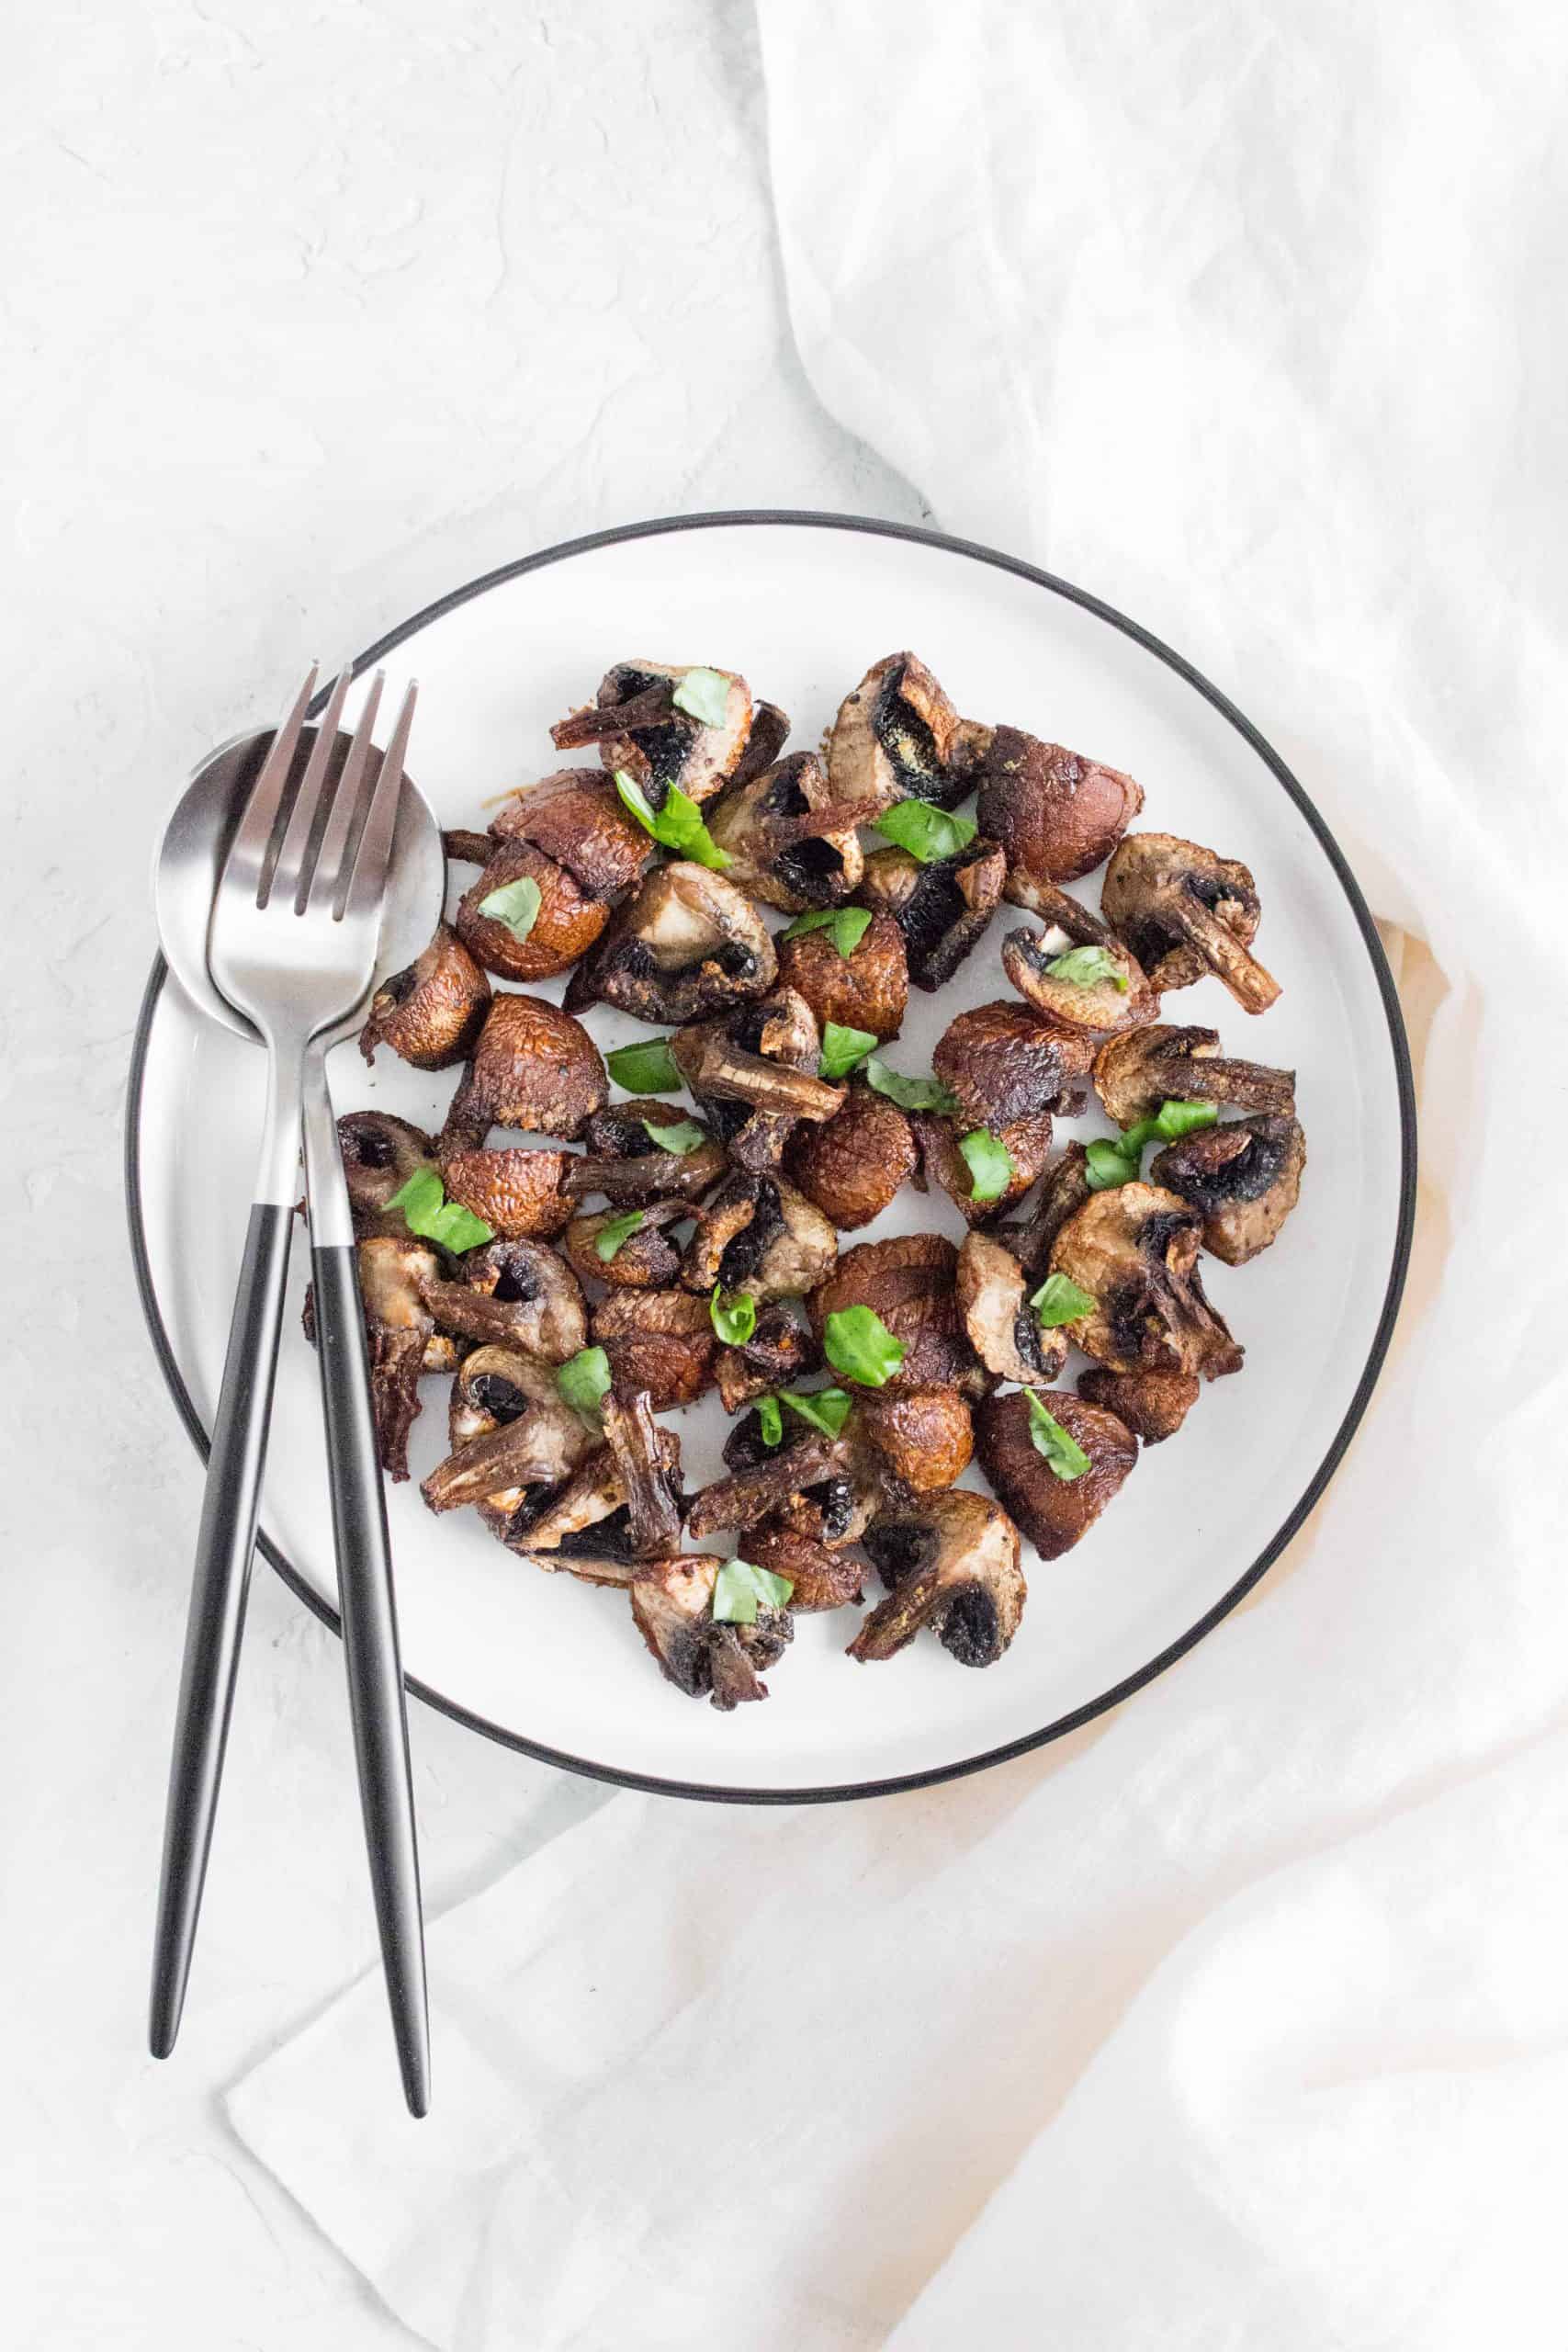 Roasted Mushrooms cooked in the Air Fryer